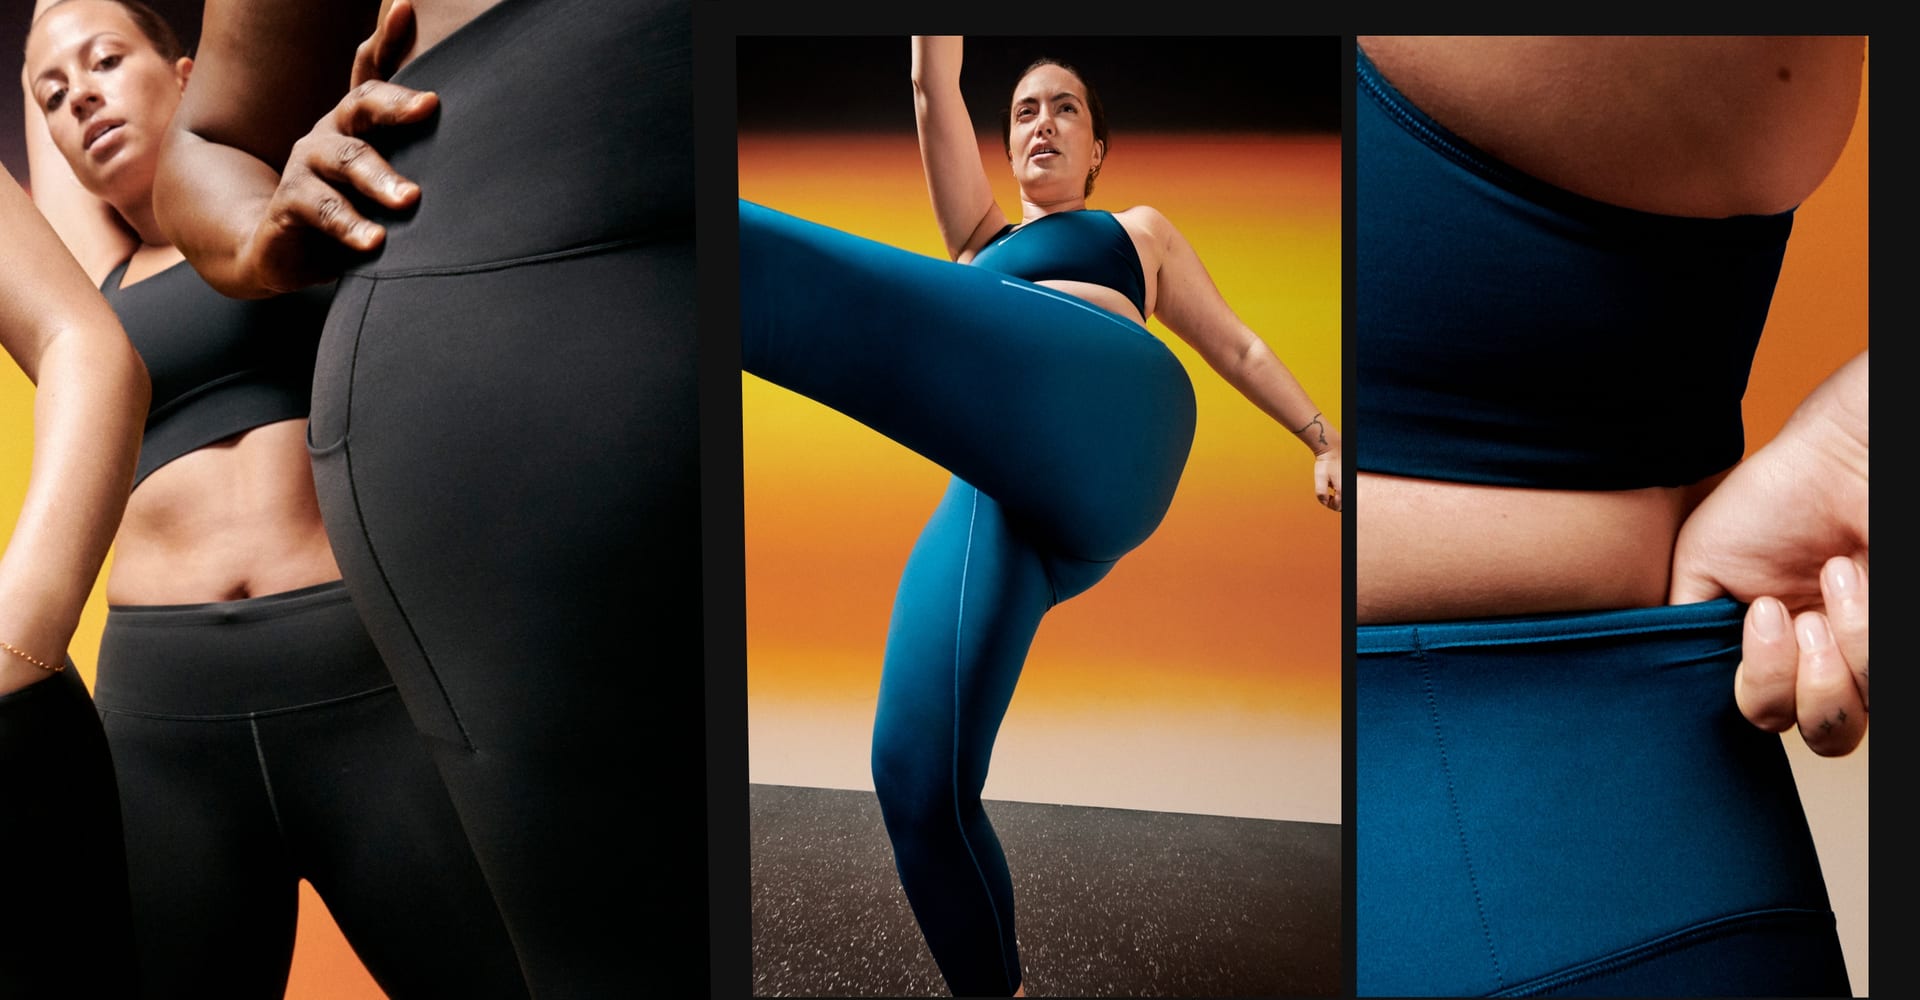 The new high-support Nike Go leggings have compression without the squeeze  (thanks InfinaLock fabric), a drawcord for adjustable snugness